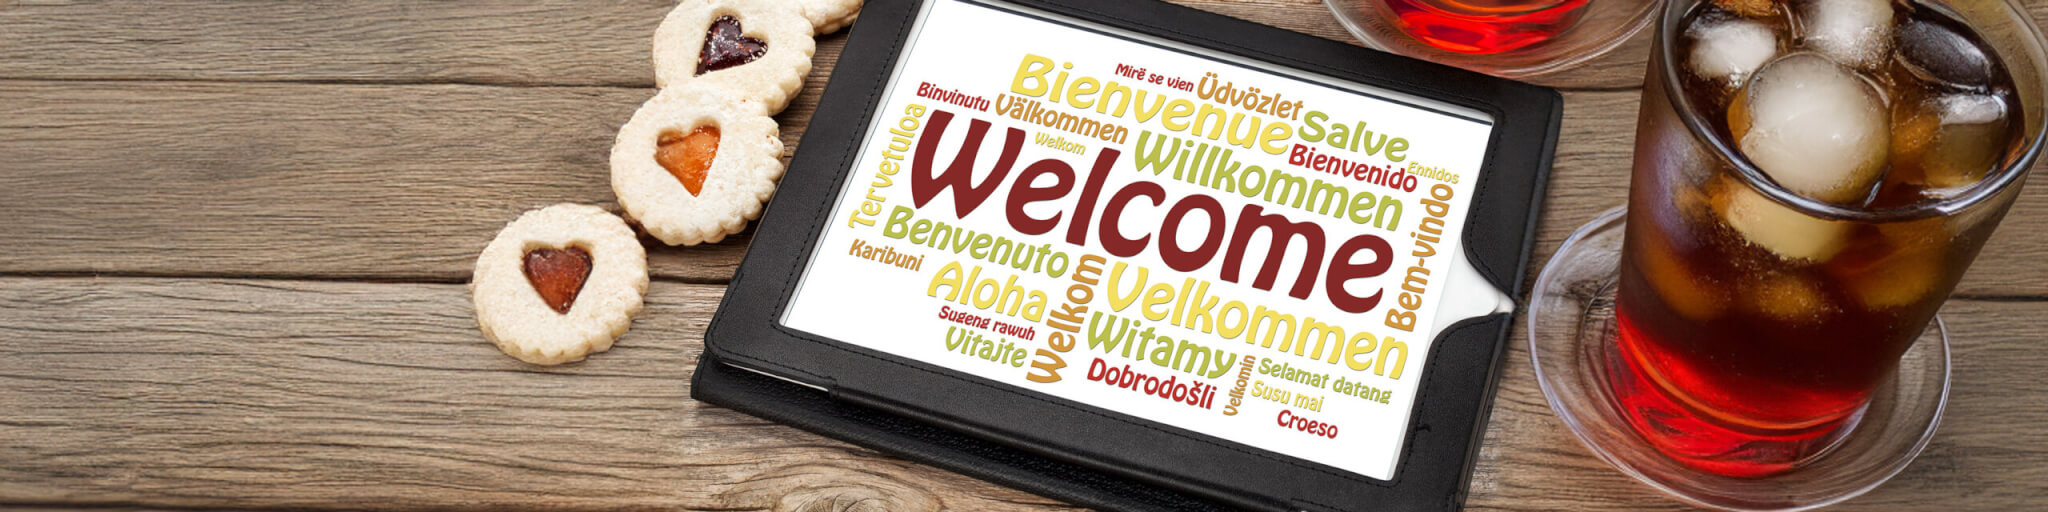 Why Your Organization Needs an Online Welcome Series